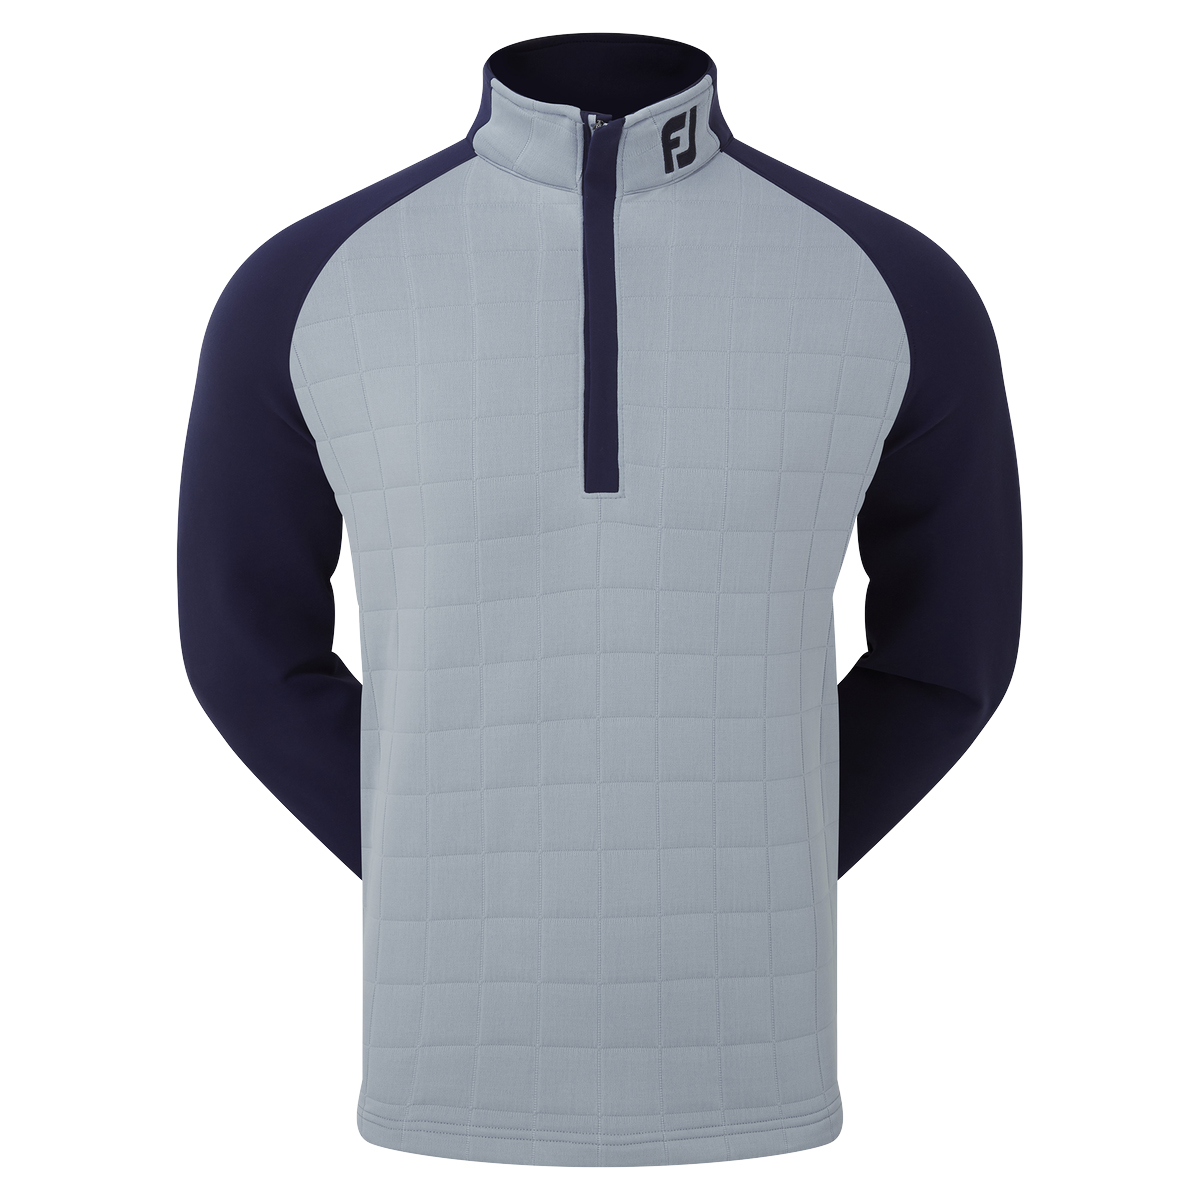 FootJoy Mens Quilted Jacquard Chill-Out XP Golf Mid-Layer Pullover  - Grey/Navy